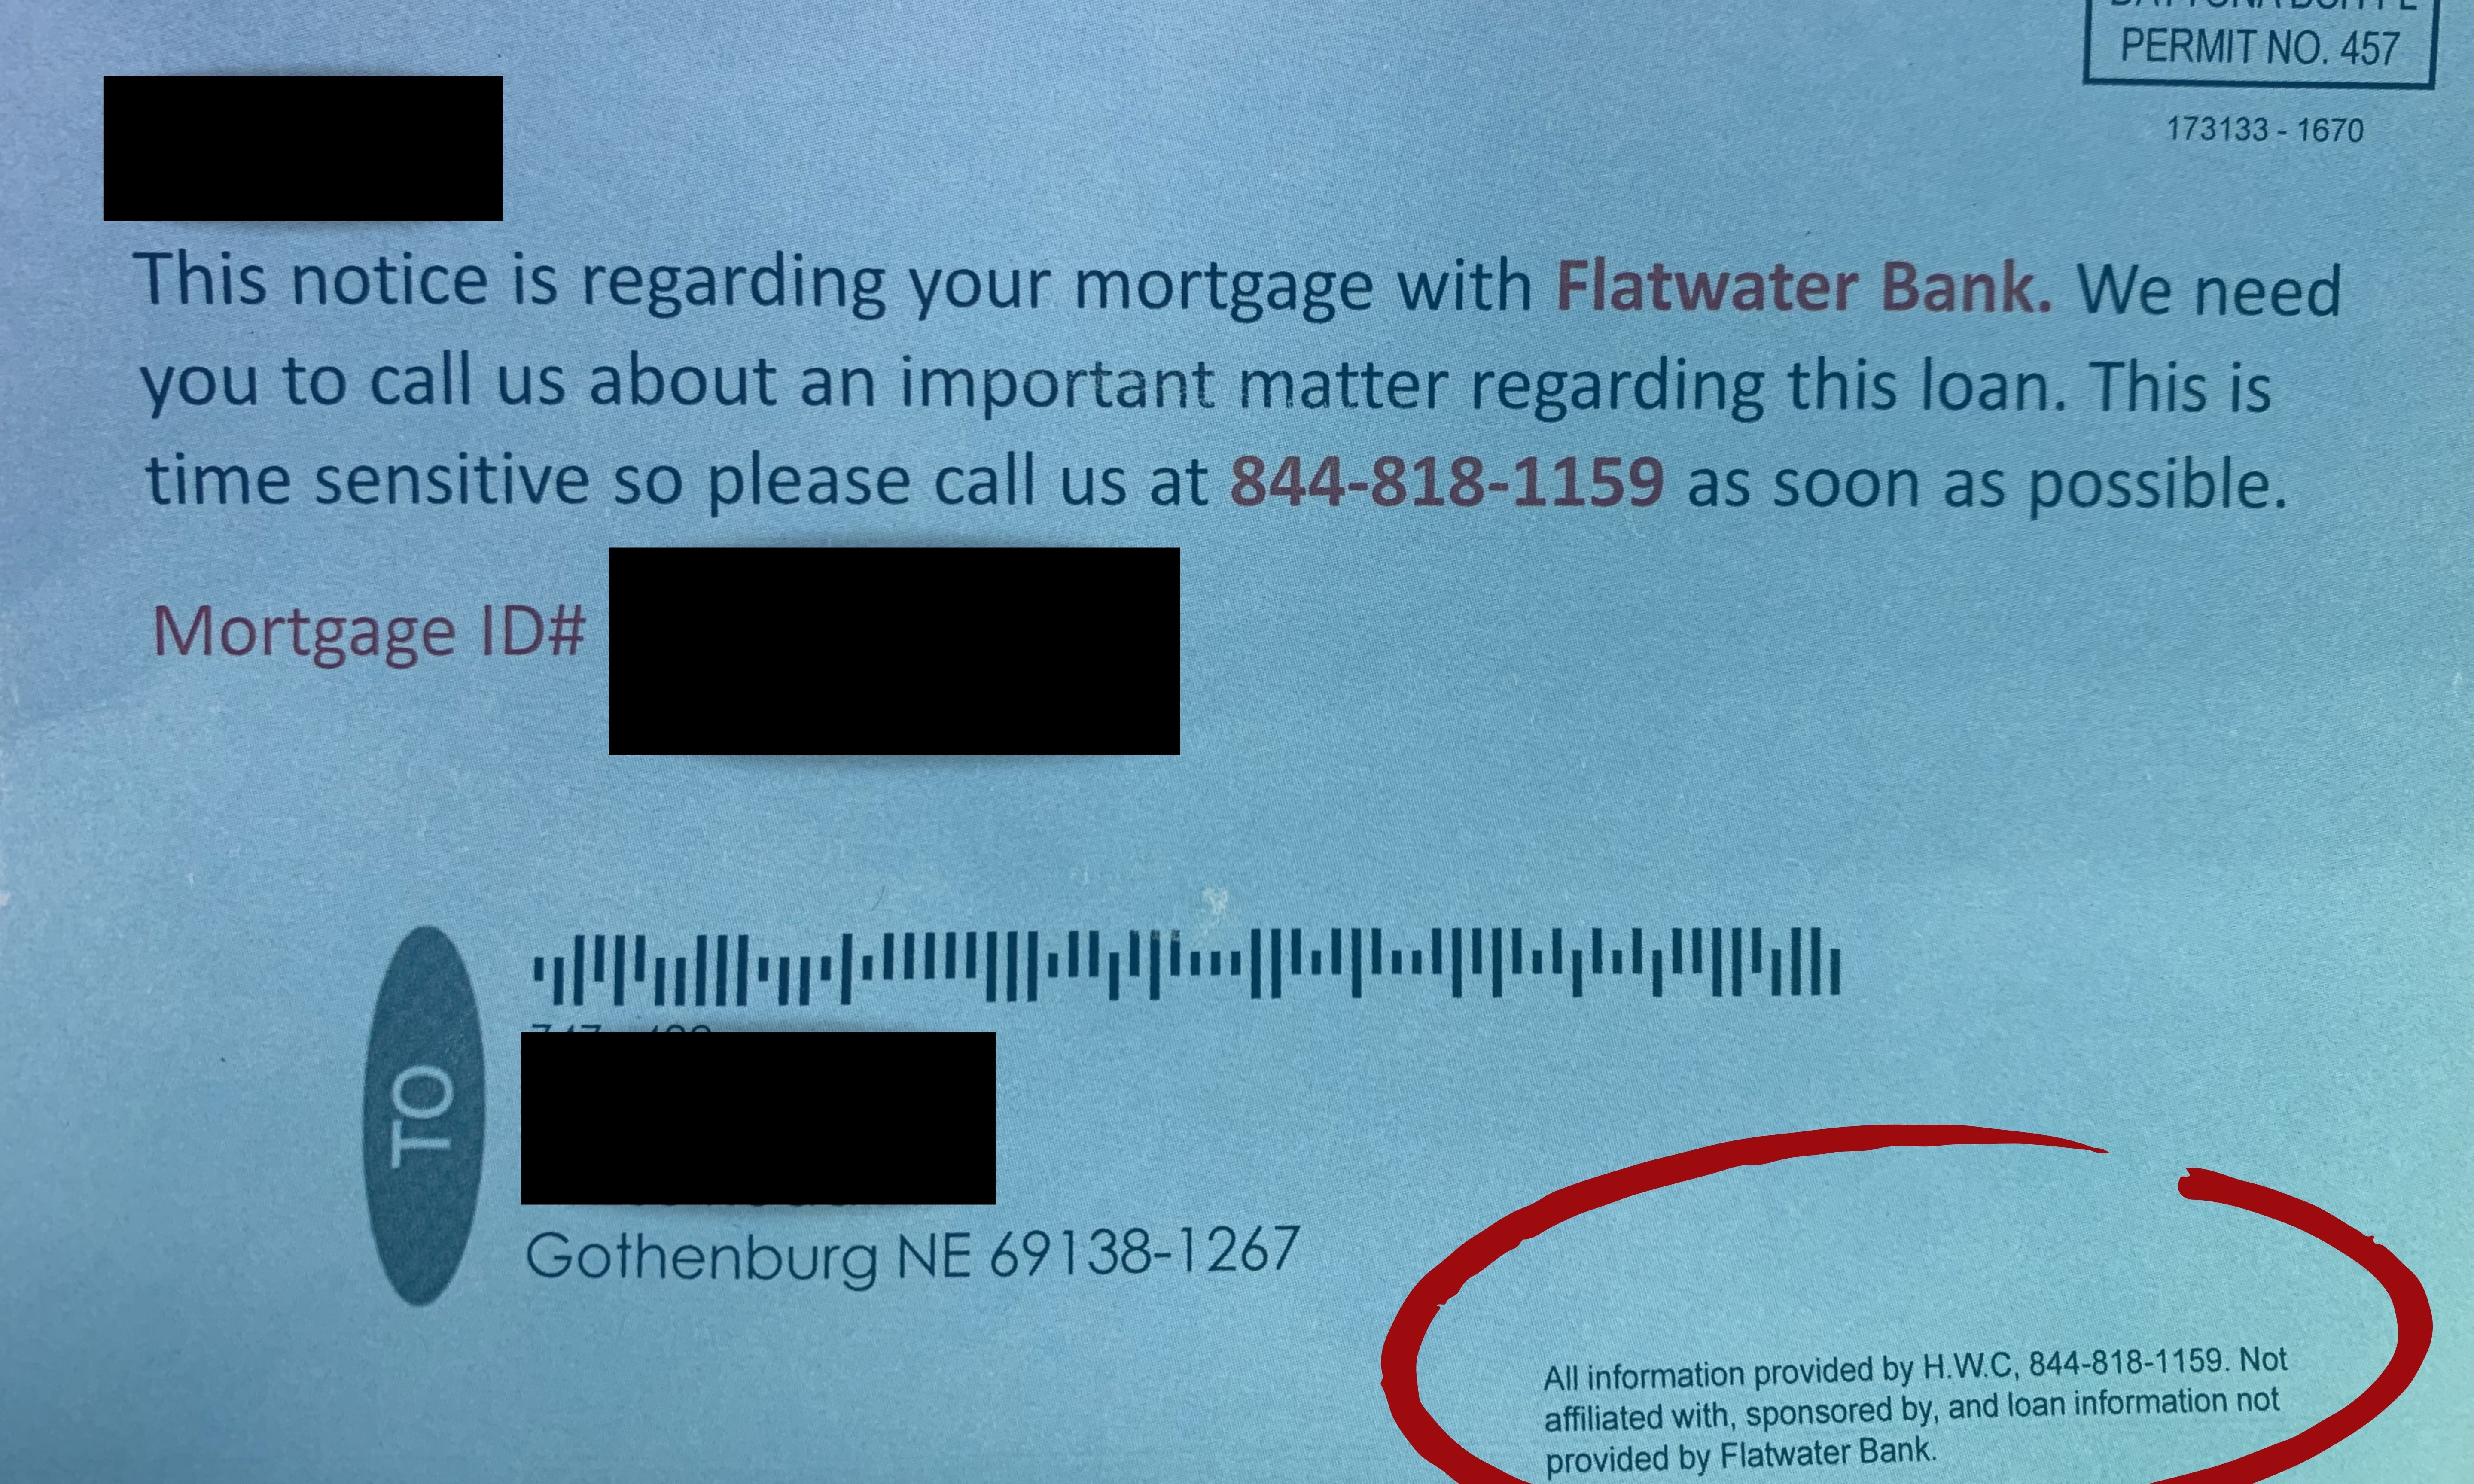 Picture of a postcard soliciting a call back on a mortgage.